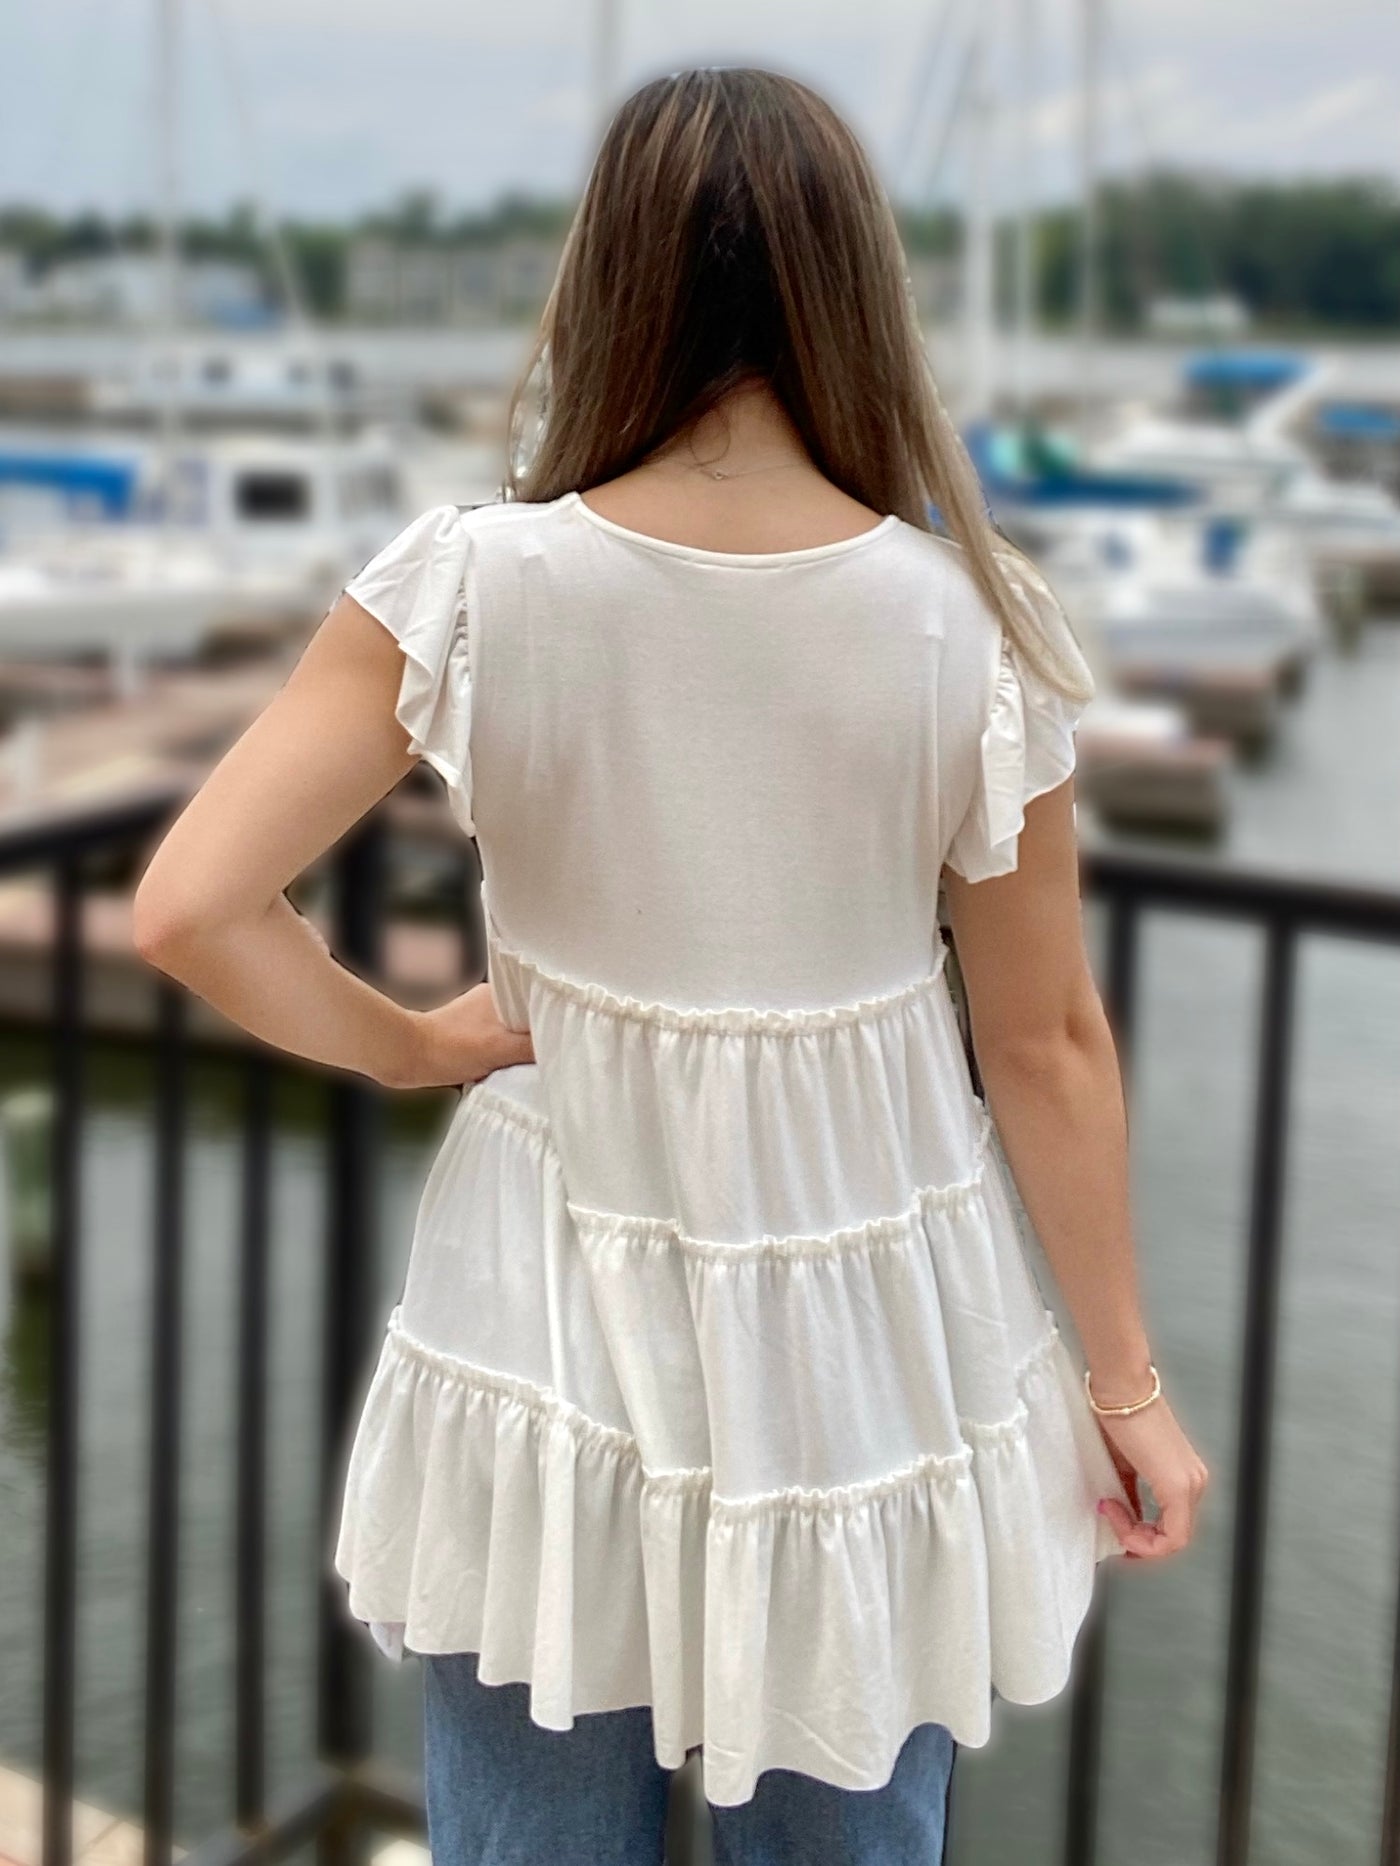 BACK VIEW OF JENNA IN TOP